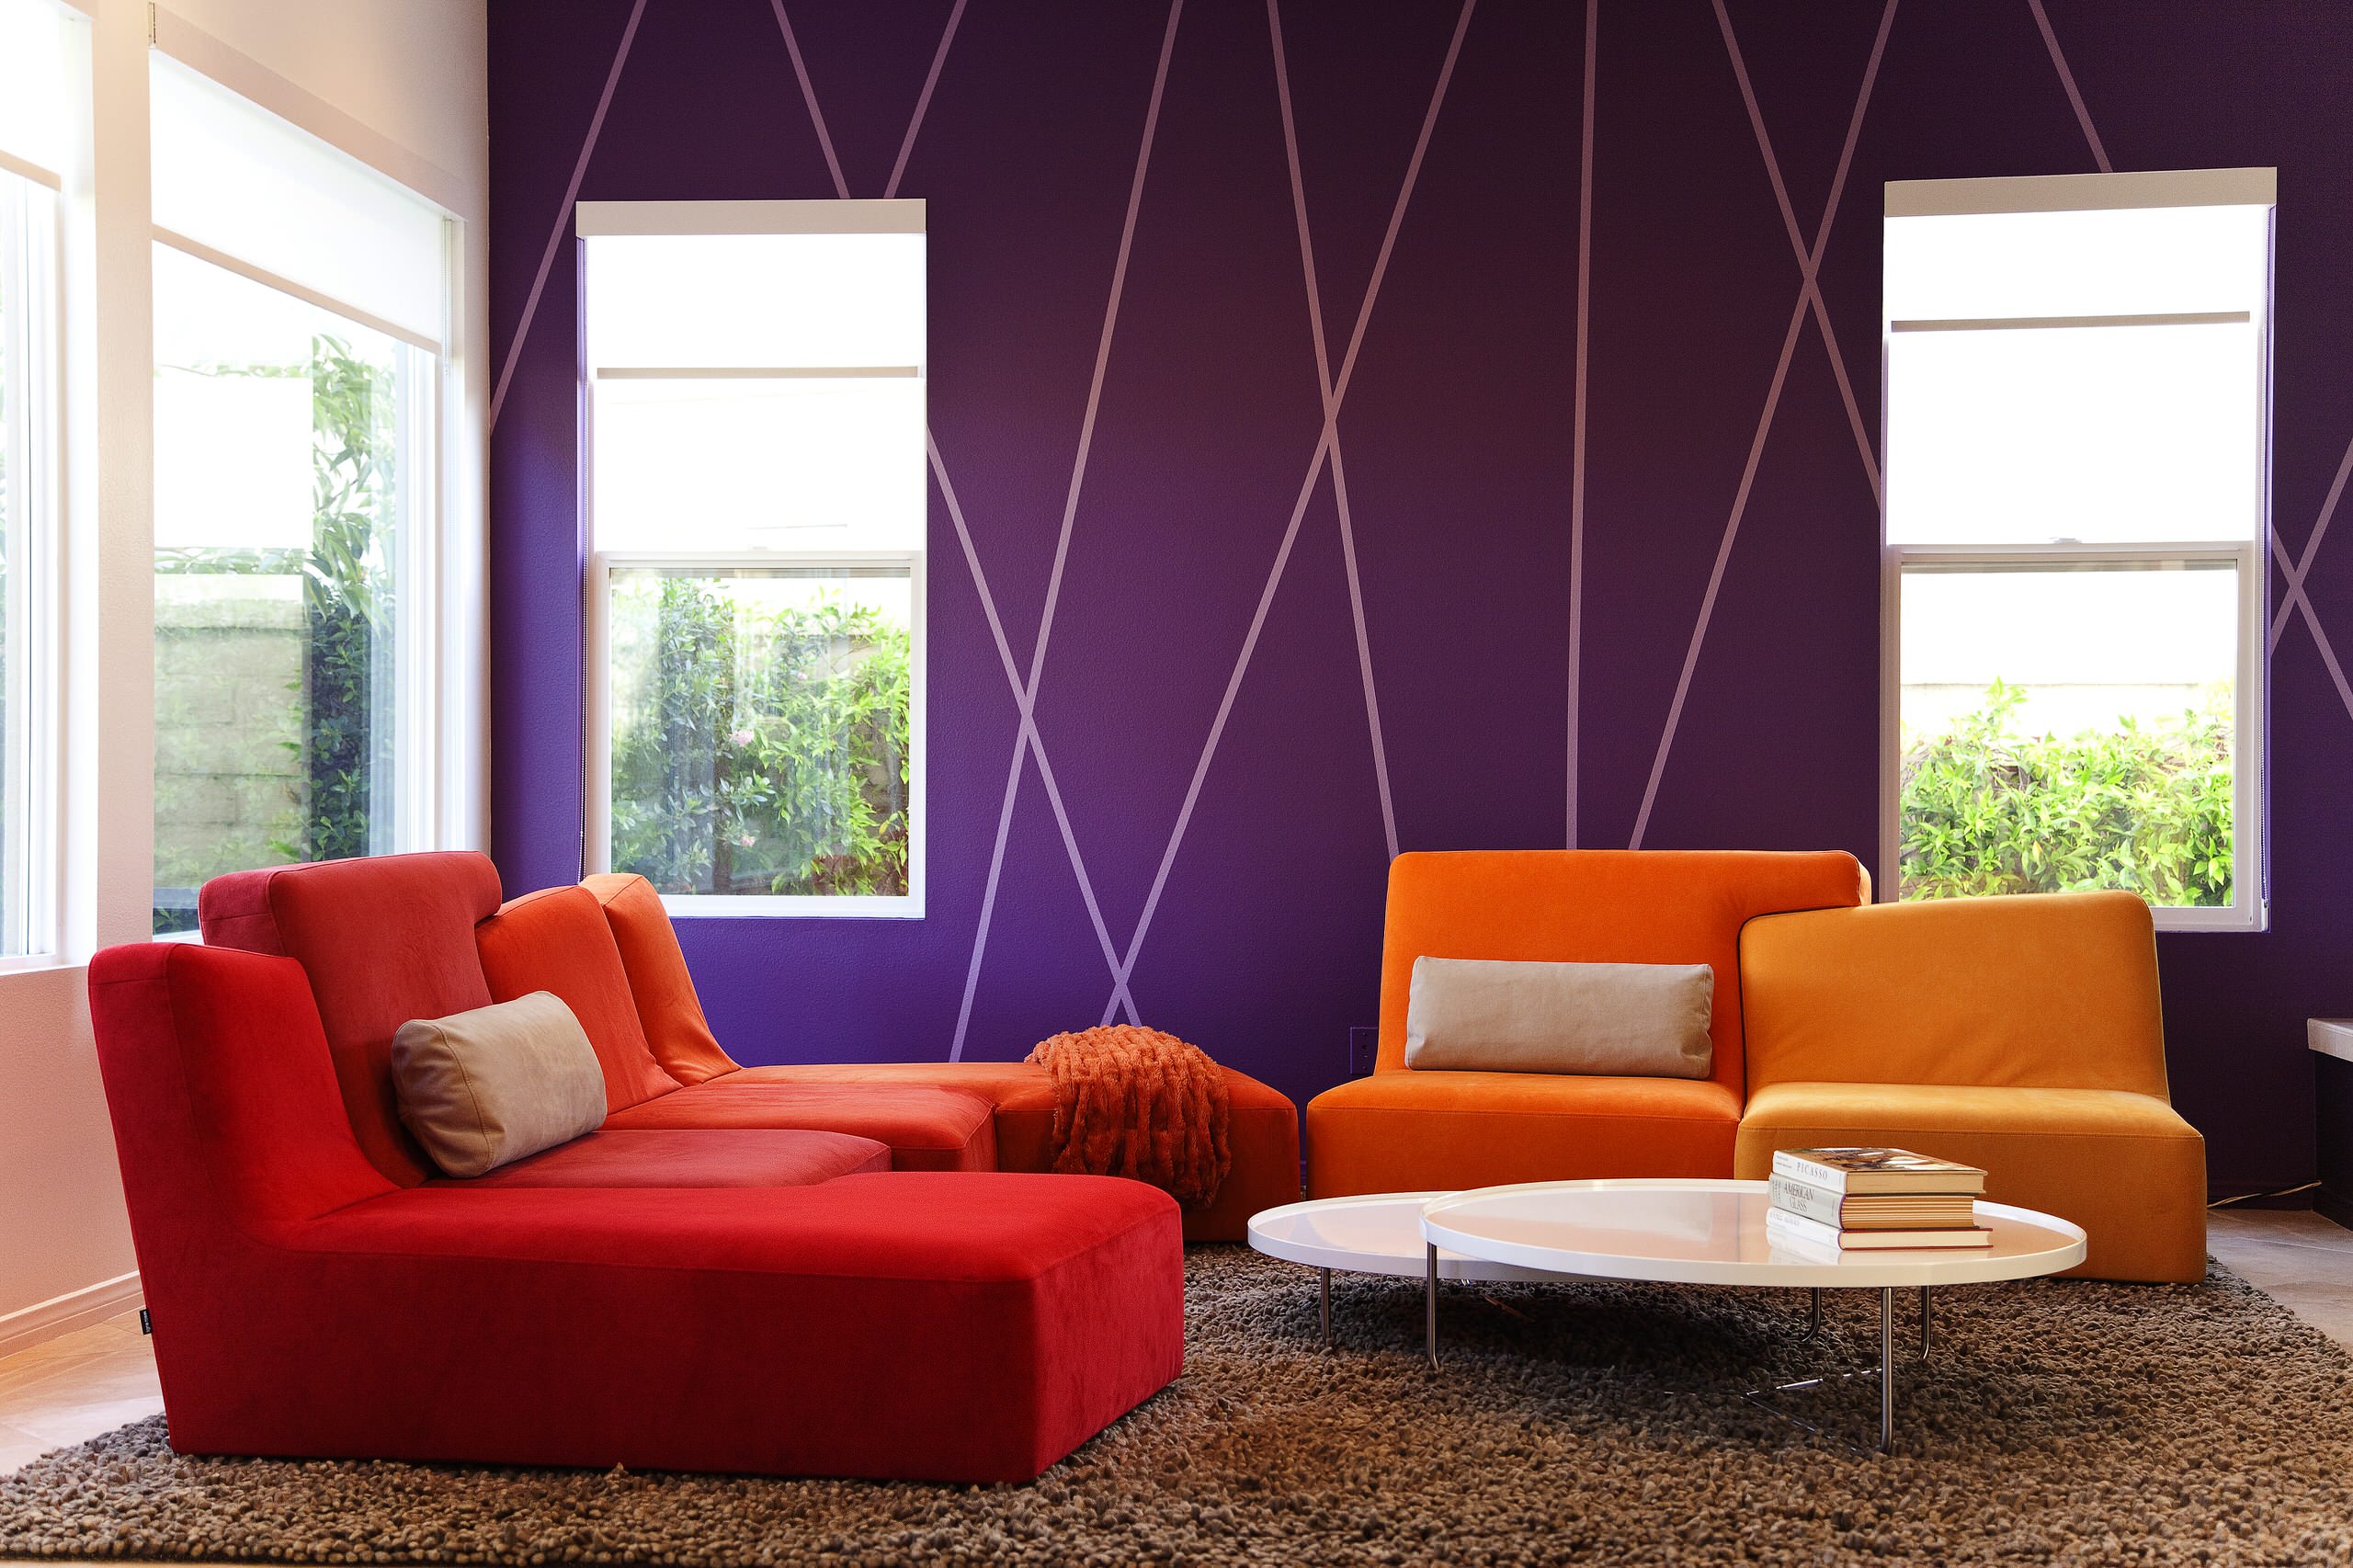 75 Living Room with Purple Walls Ideas You'll Love - February, 2023 | Houzz